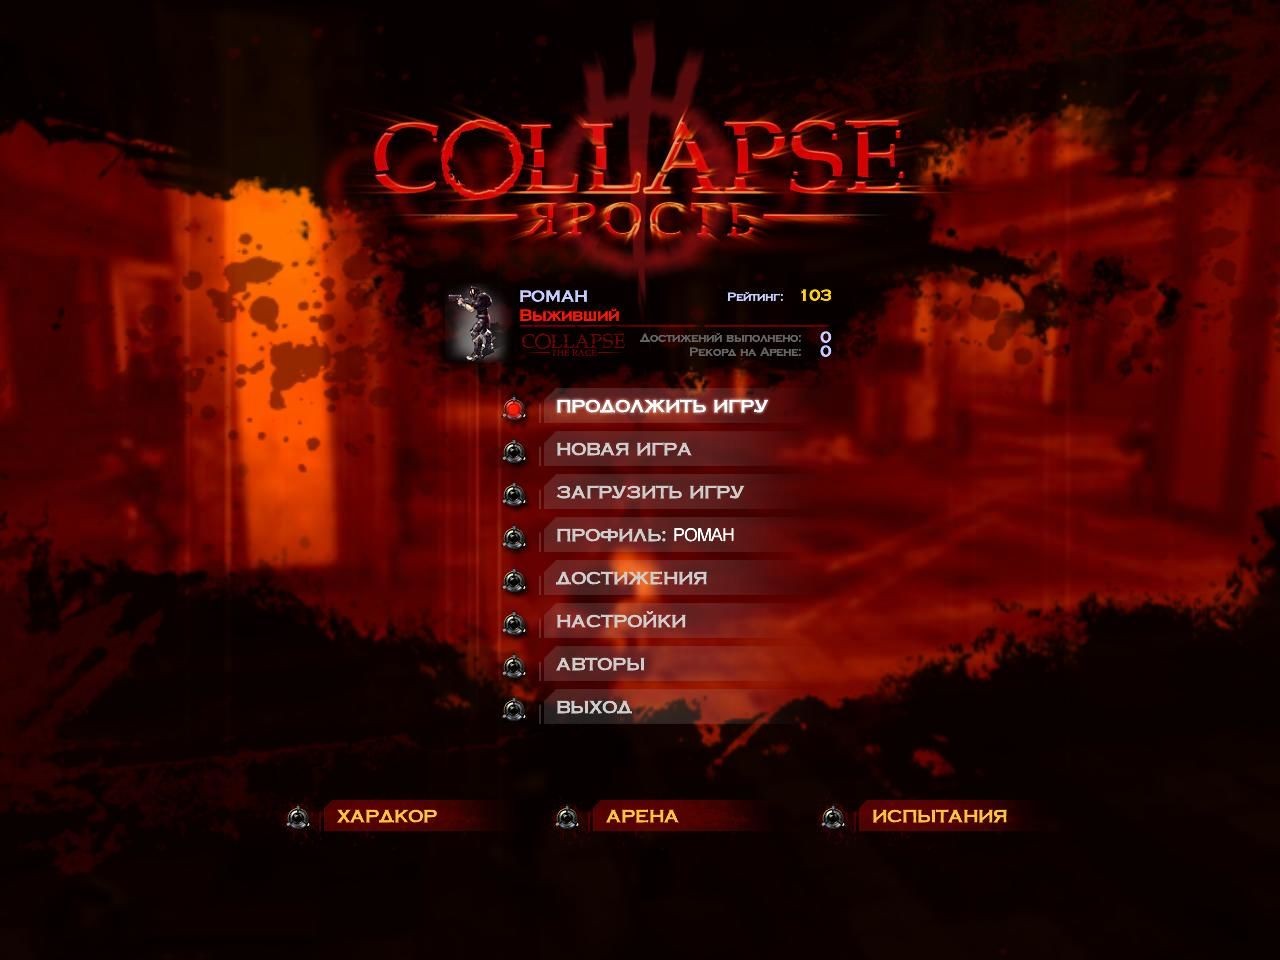 Collapse the rage steam фото 112